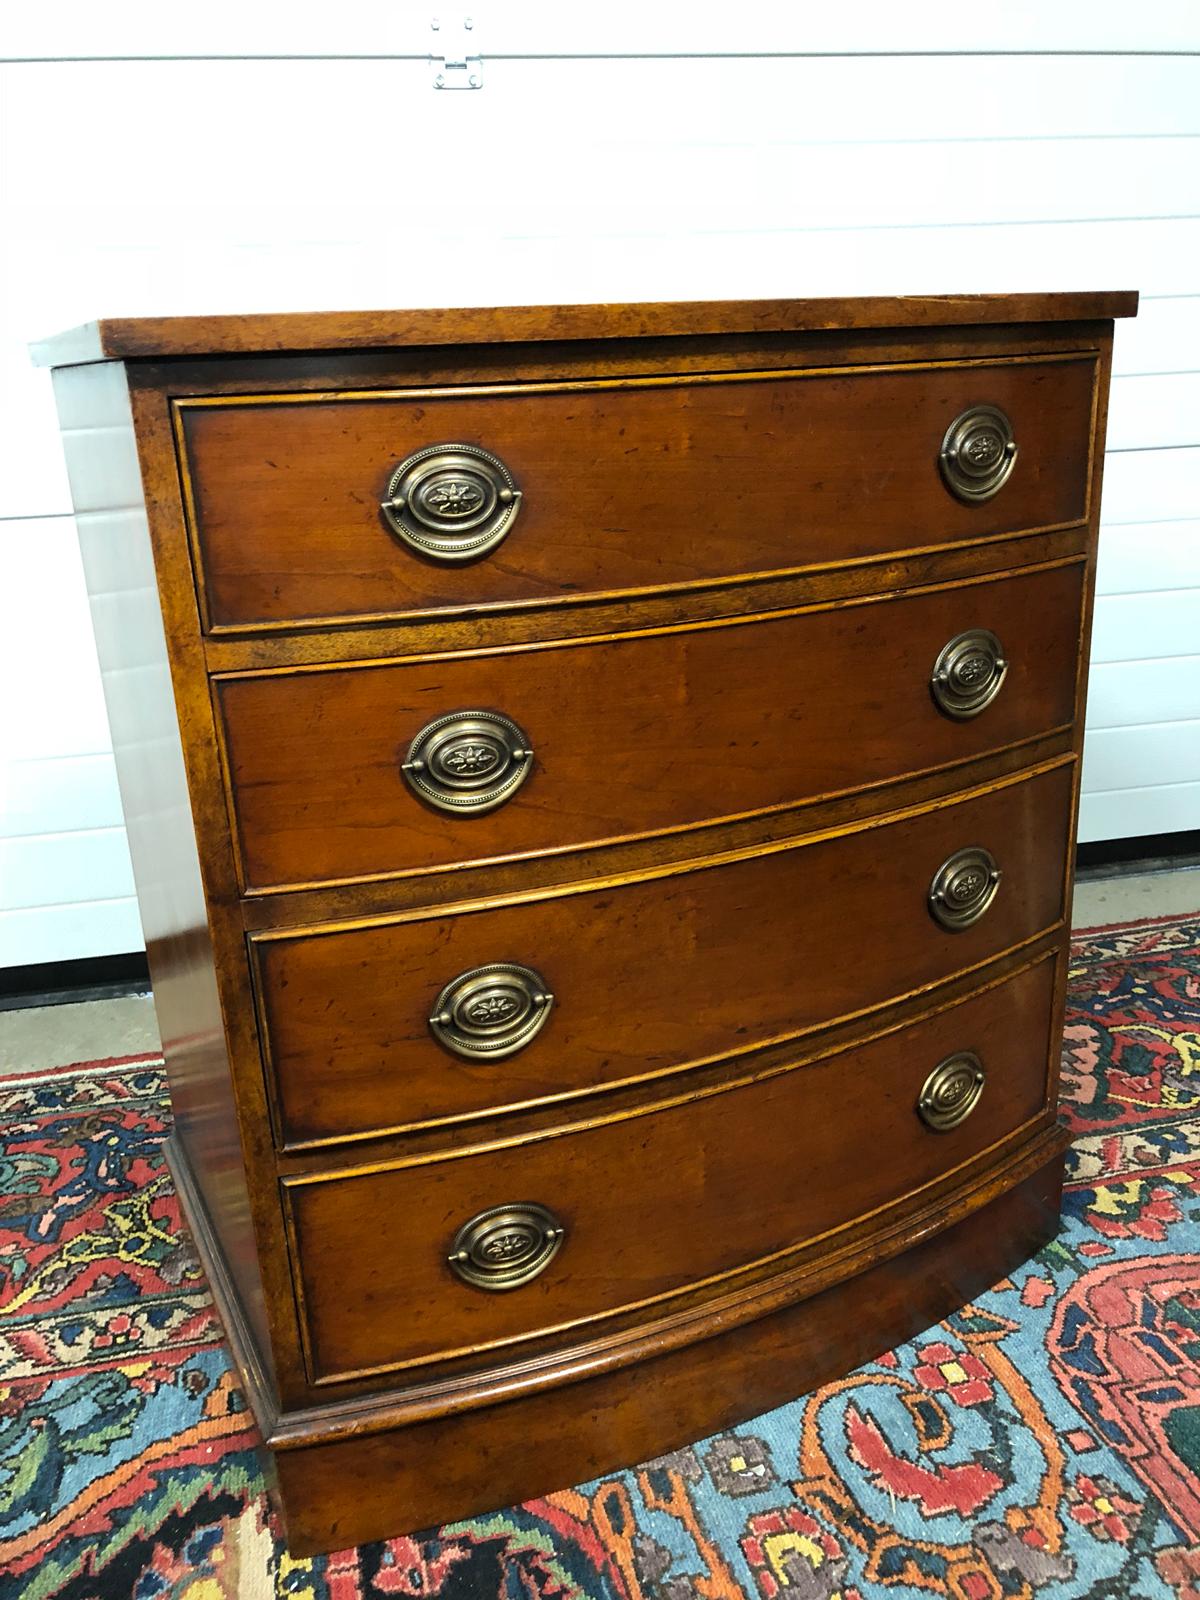 BOW FRONTED ANTIQUE STYLE CHEST OF DRAWERS WITH BRASS HANDLES VERY GOOD CONDITION MEASUREMENTS: H